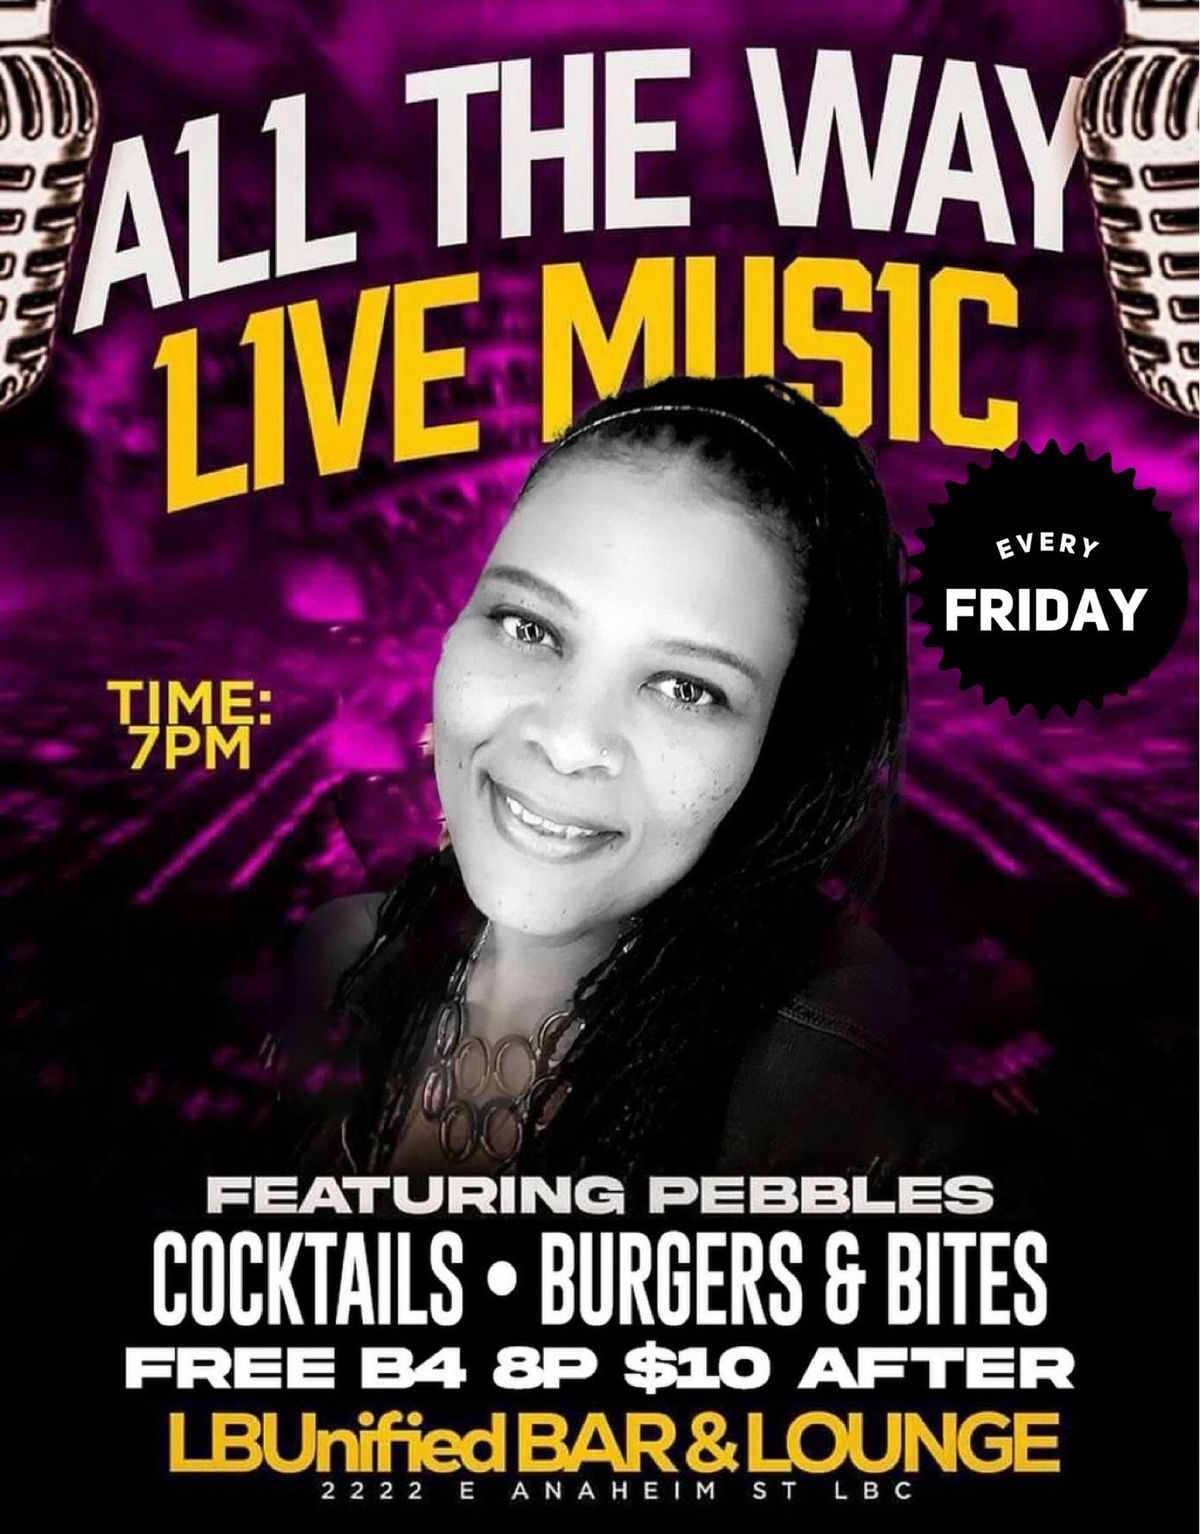 ALL THE WAY LIVE MUSIC FRIDAYZ 